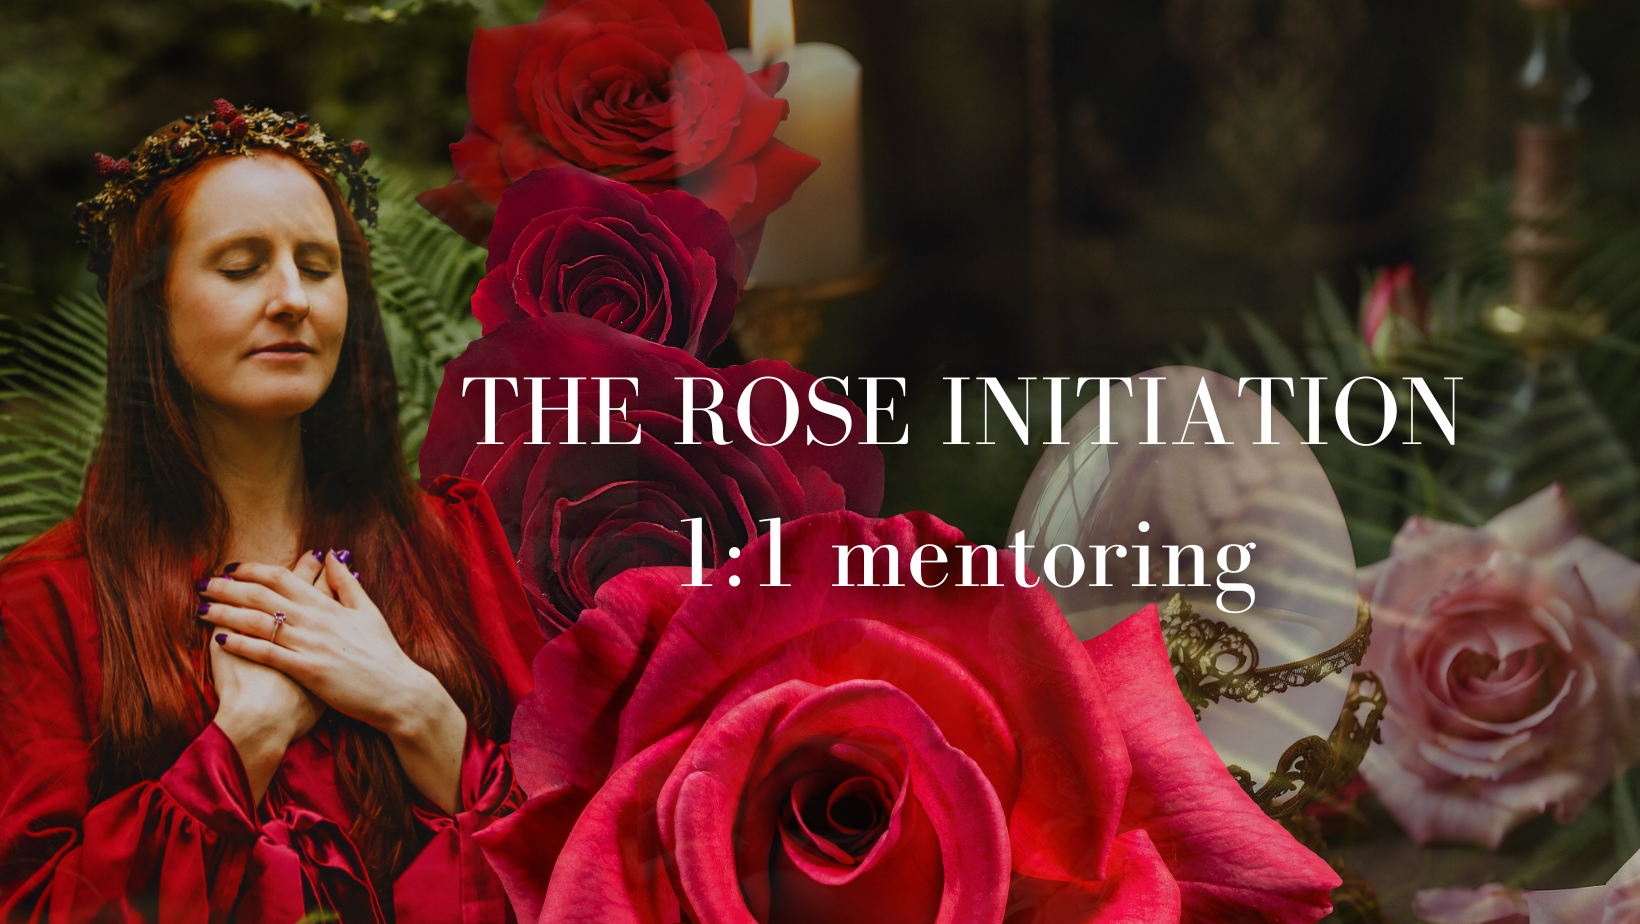 The Rose Initiation: Private Mentoring